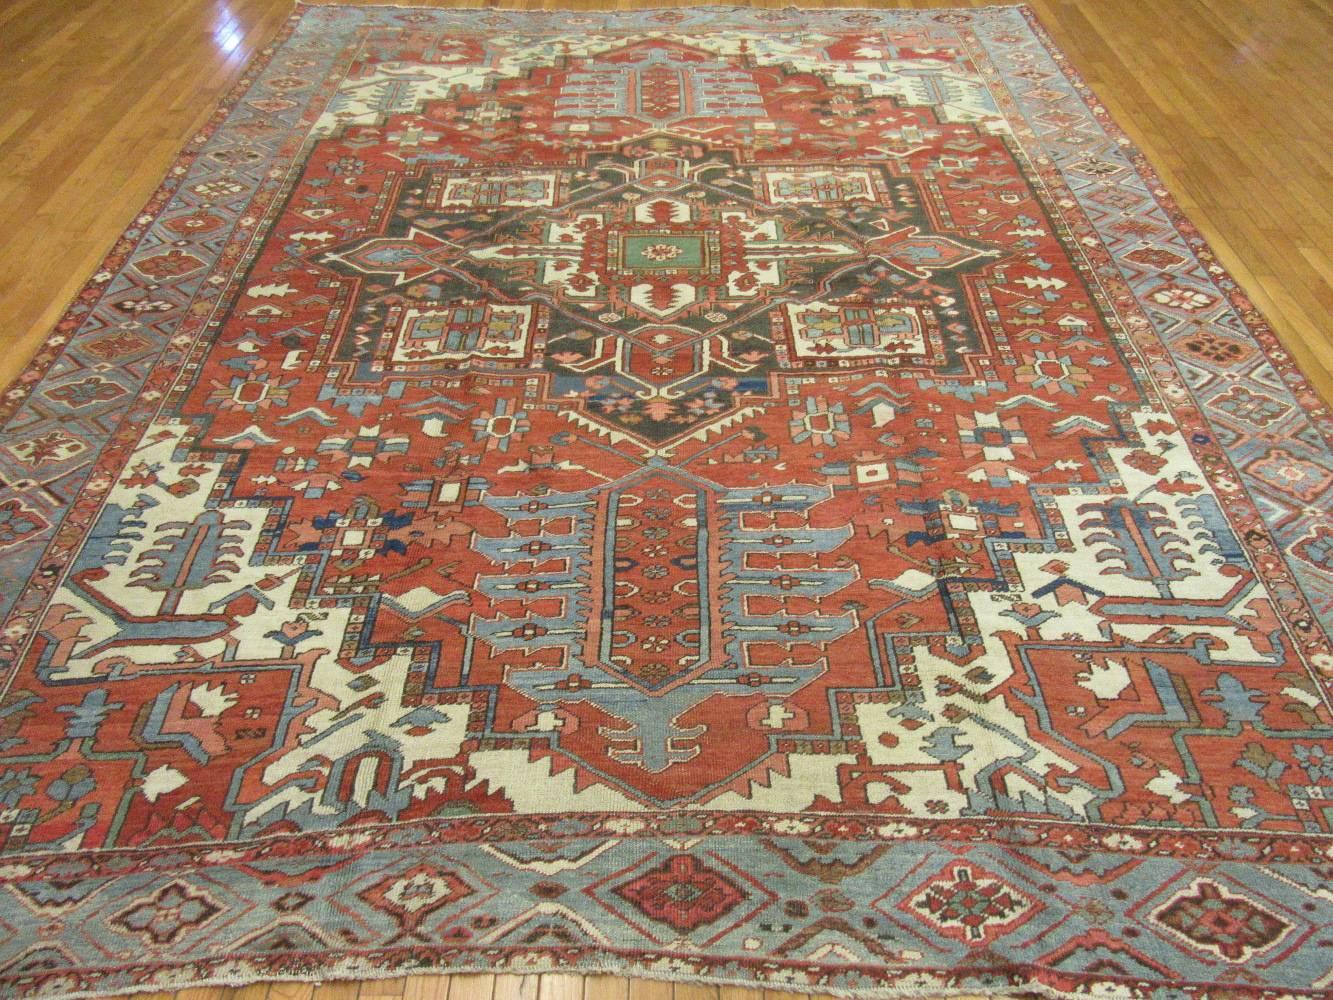 This is an antique hand-knotted rugs from the village of Heriz in northwest Iran. The rug has a traditional geometric central and corner medallion design. It is made with natural wool colored with natural dyes on a cotton foundation. It has a